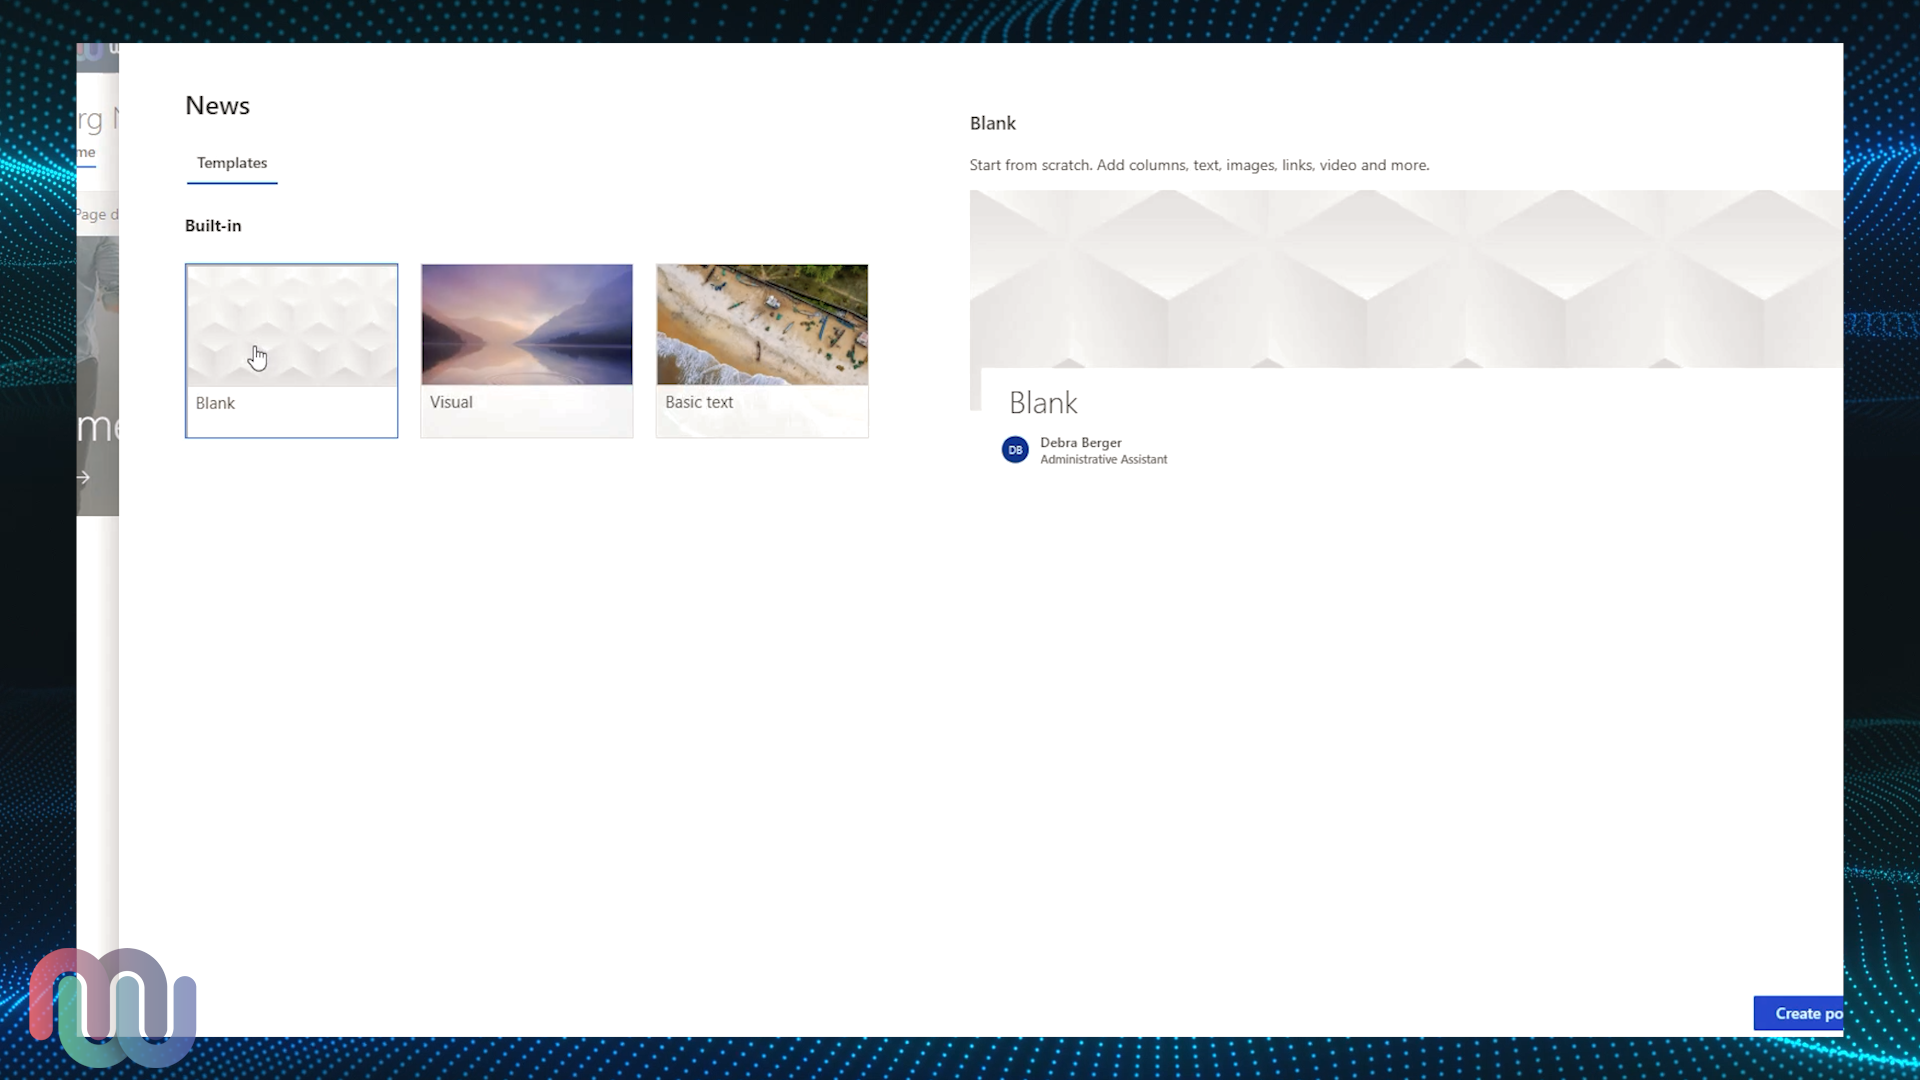 SharePoint News template selection page